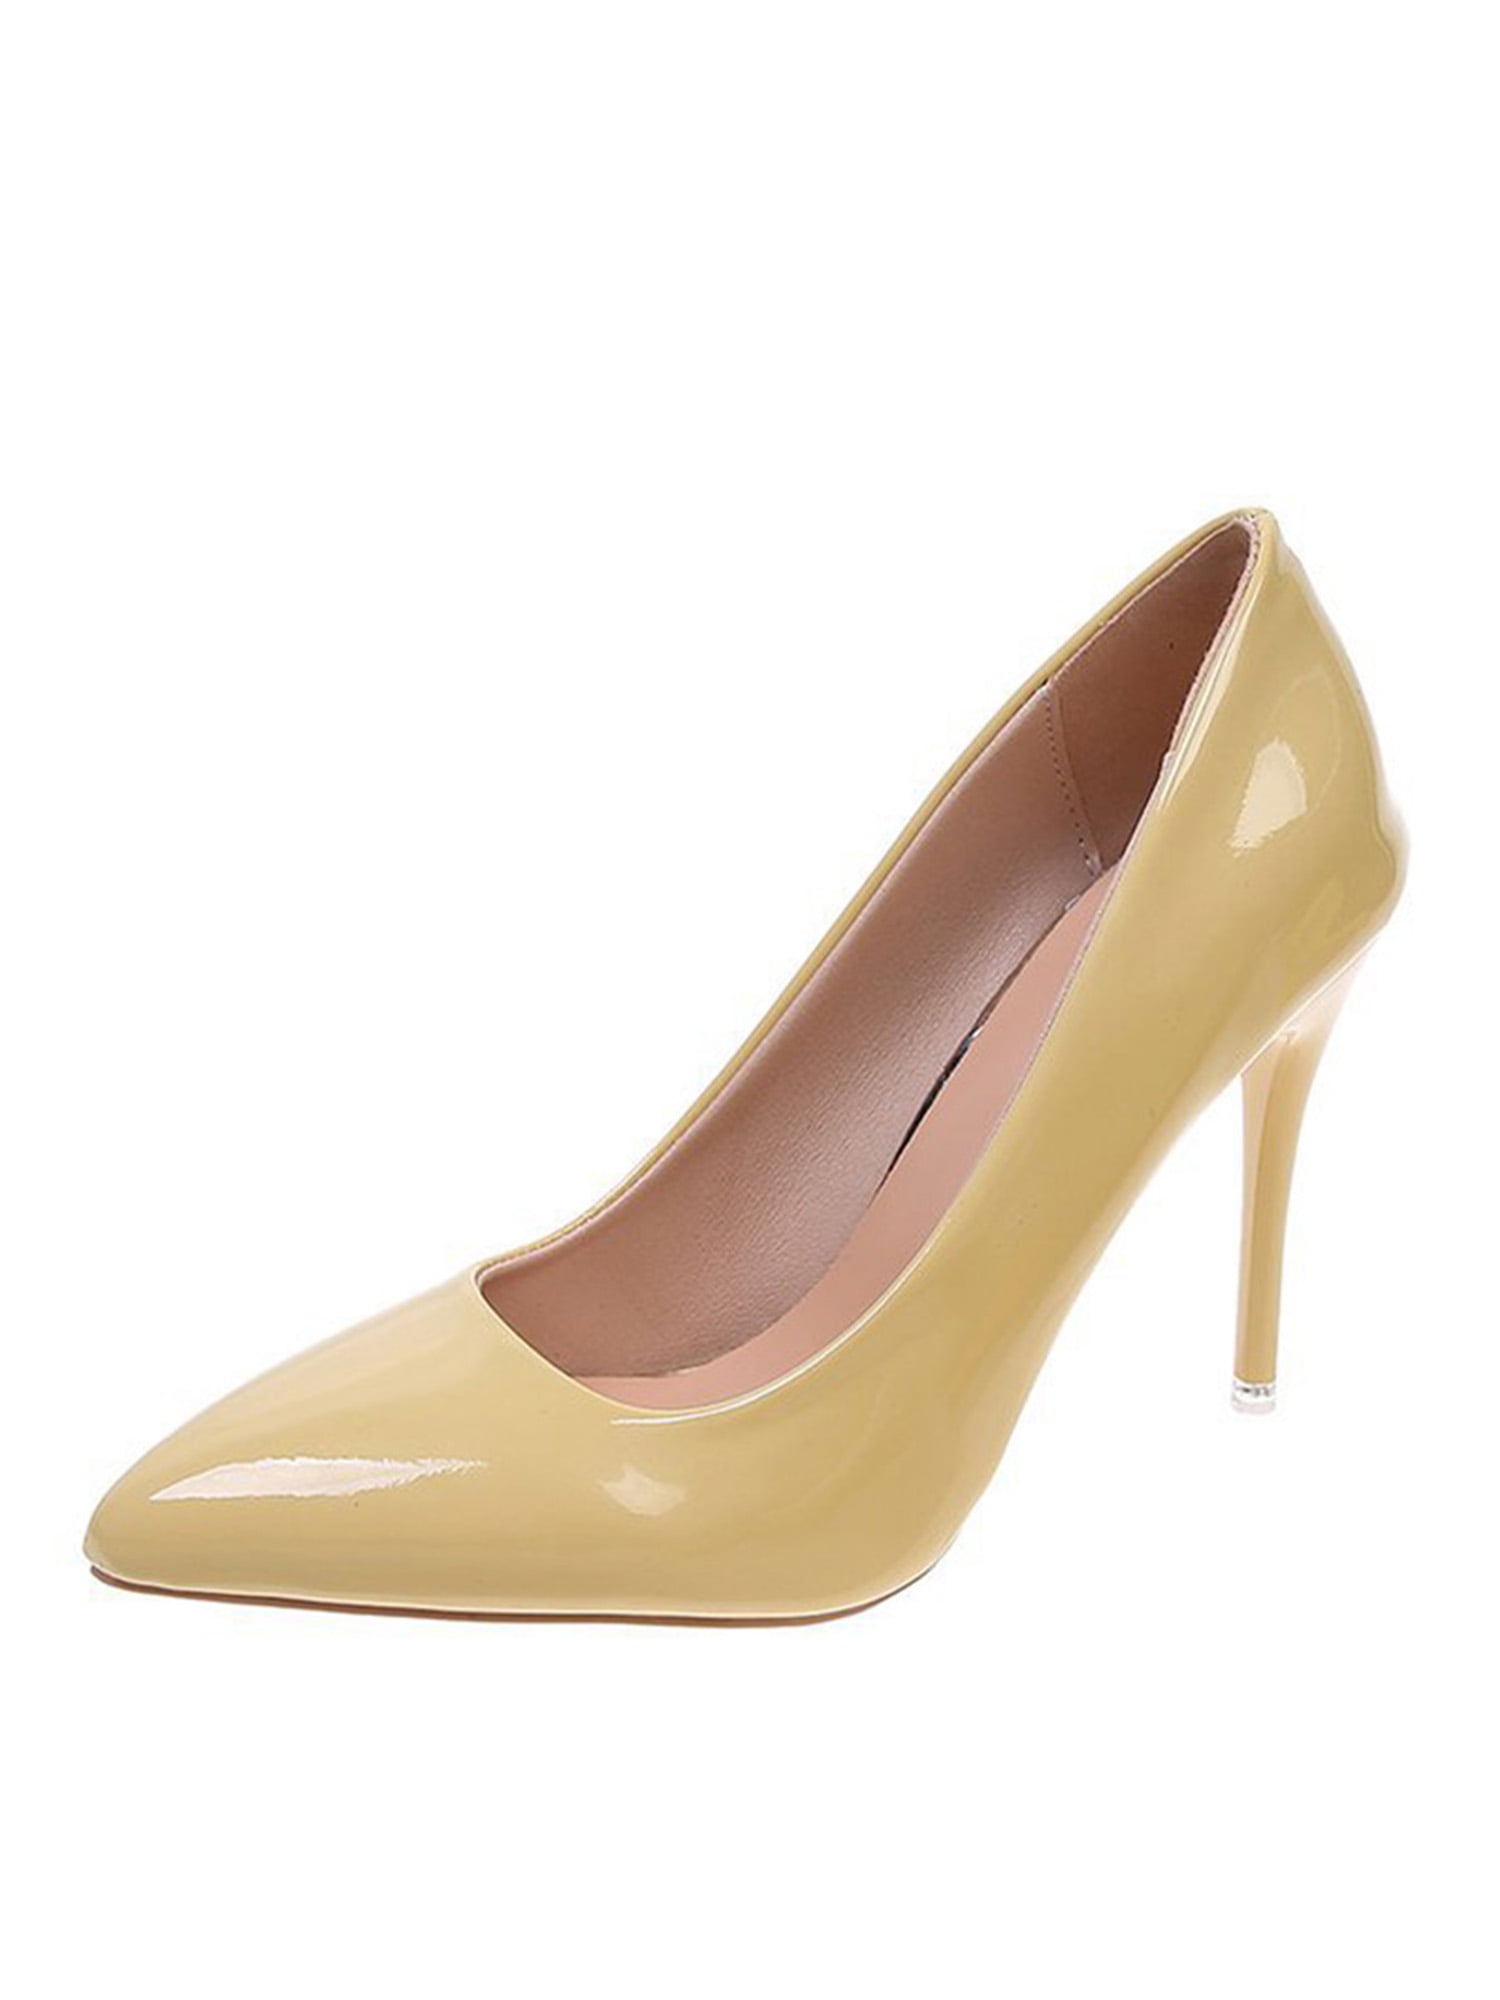 Vedolay High Heels For Prom Womens Cute Casual Pointed Toe Low Heel Pumps  Dressy Shoes,Yellow 8.5 - Walmart.com